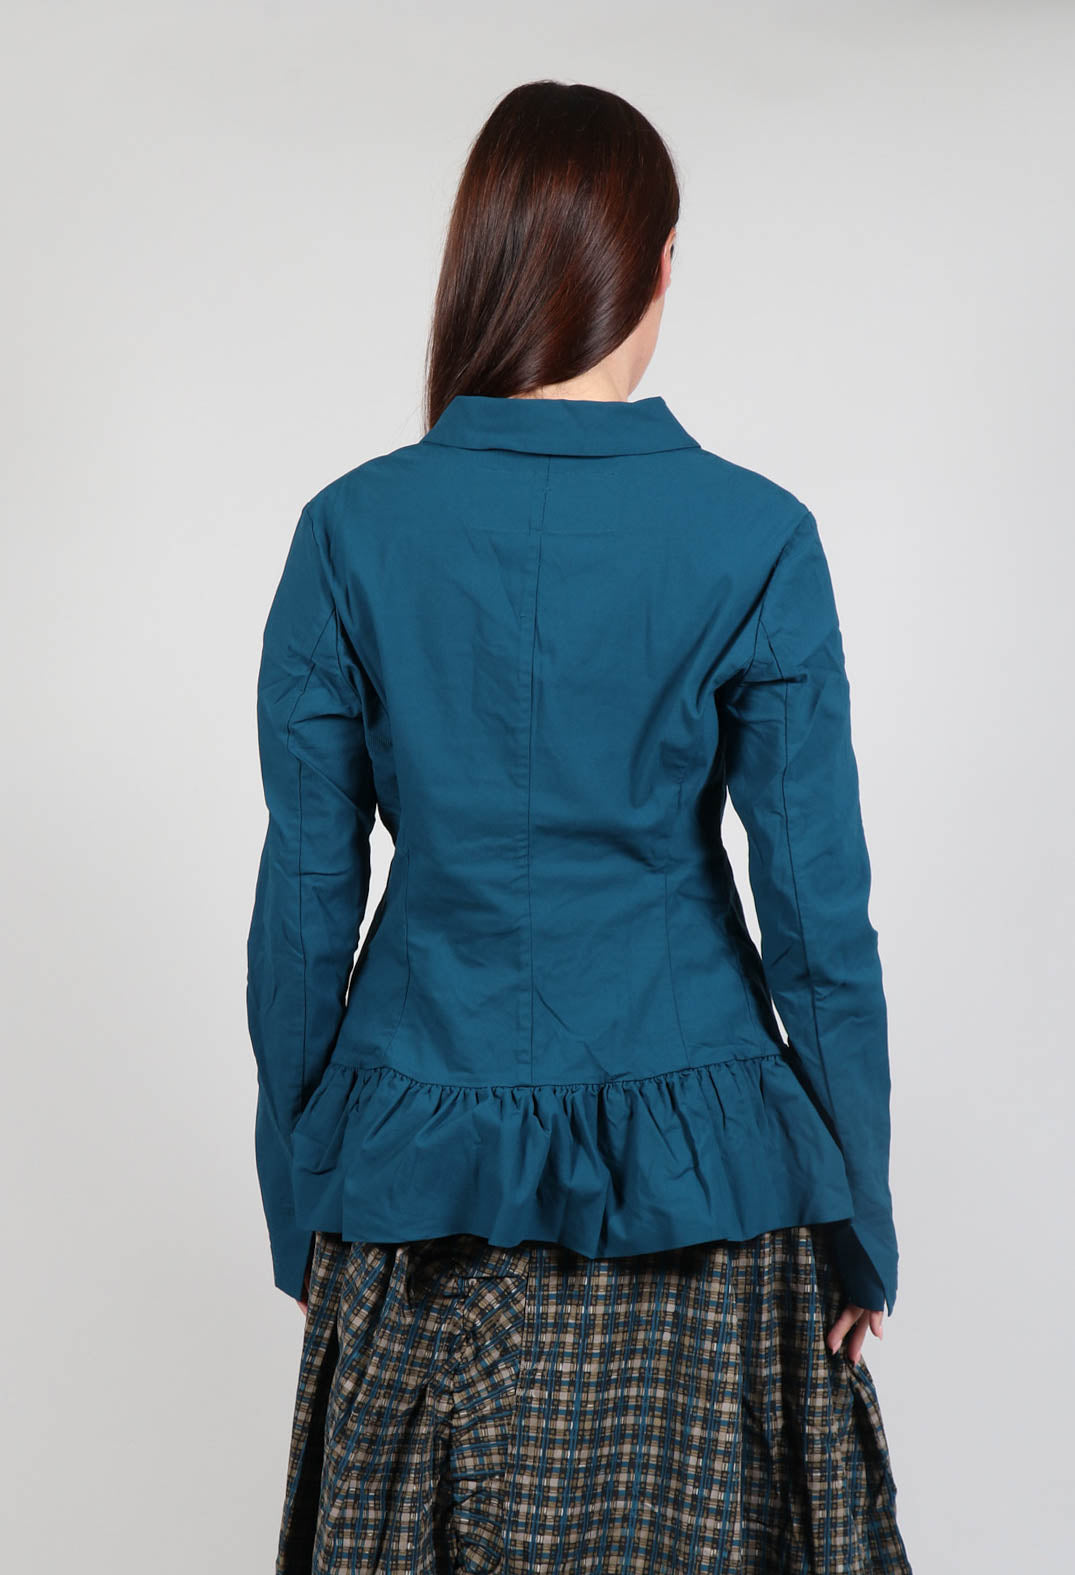 Tailored Jacket with Peplum Hem in Ink